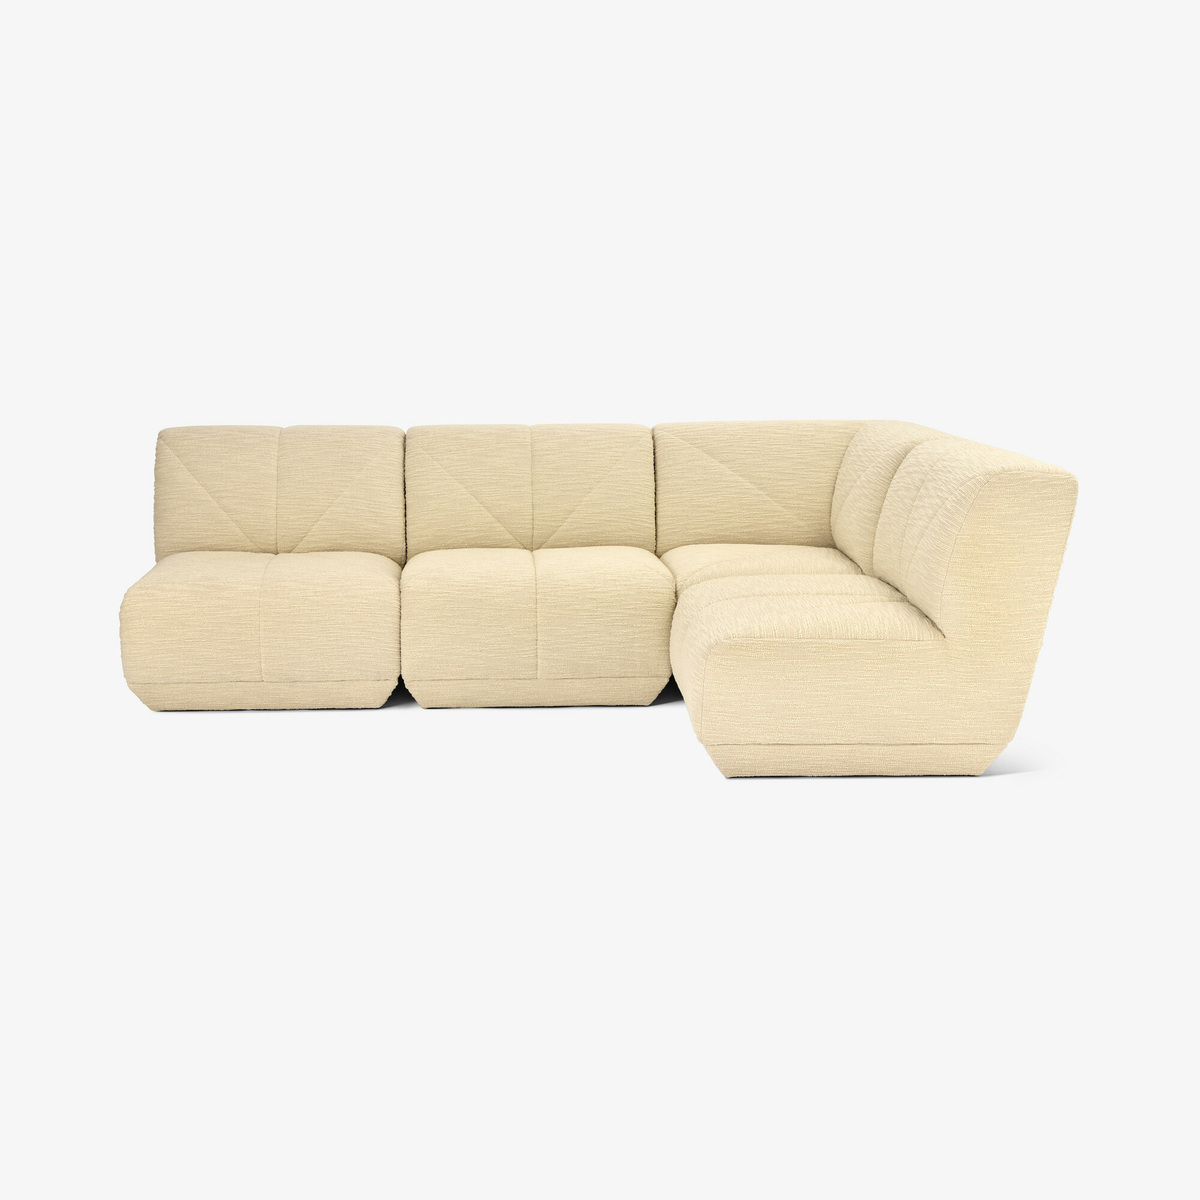 Chill Armchair, Off-White - Curl fabric - image 12